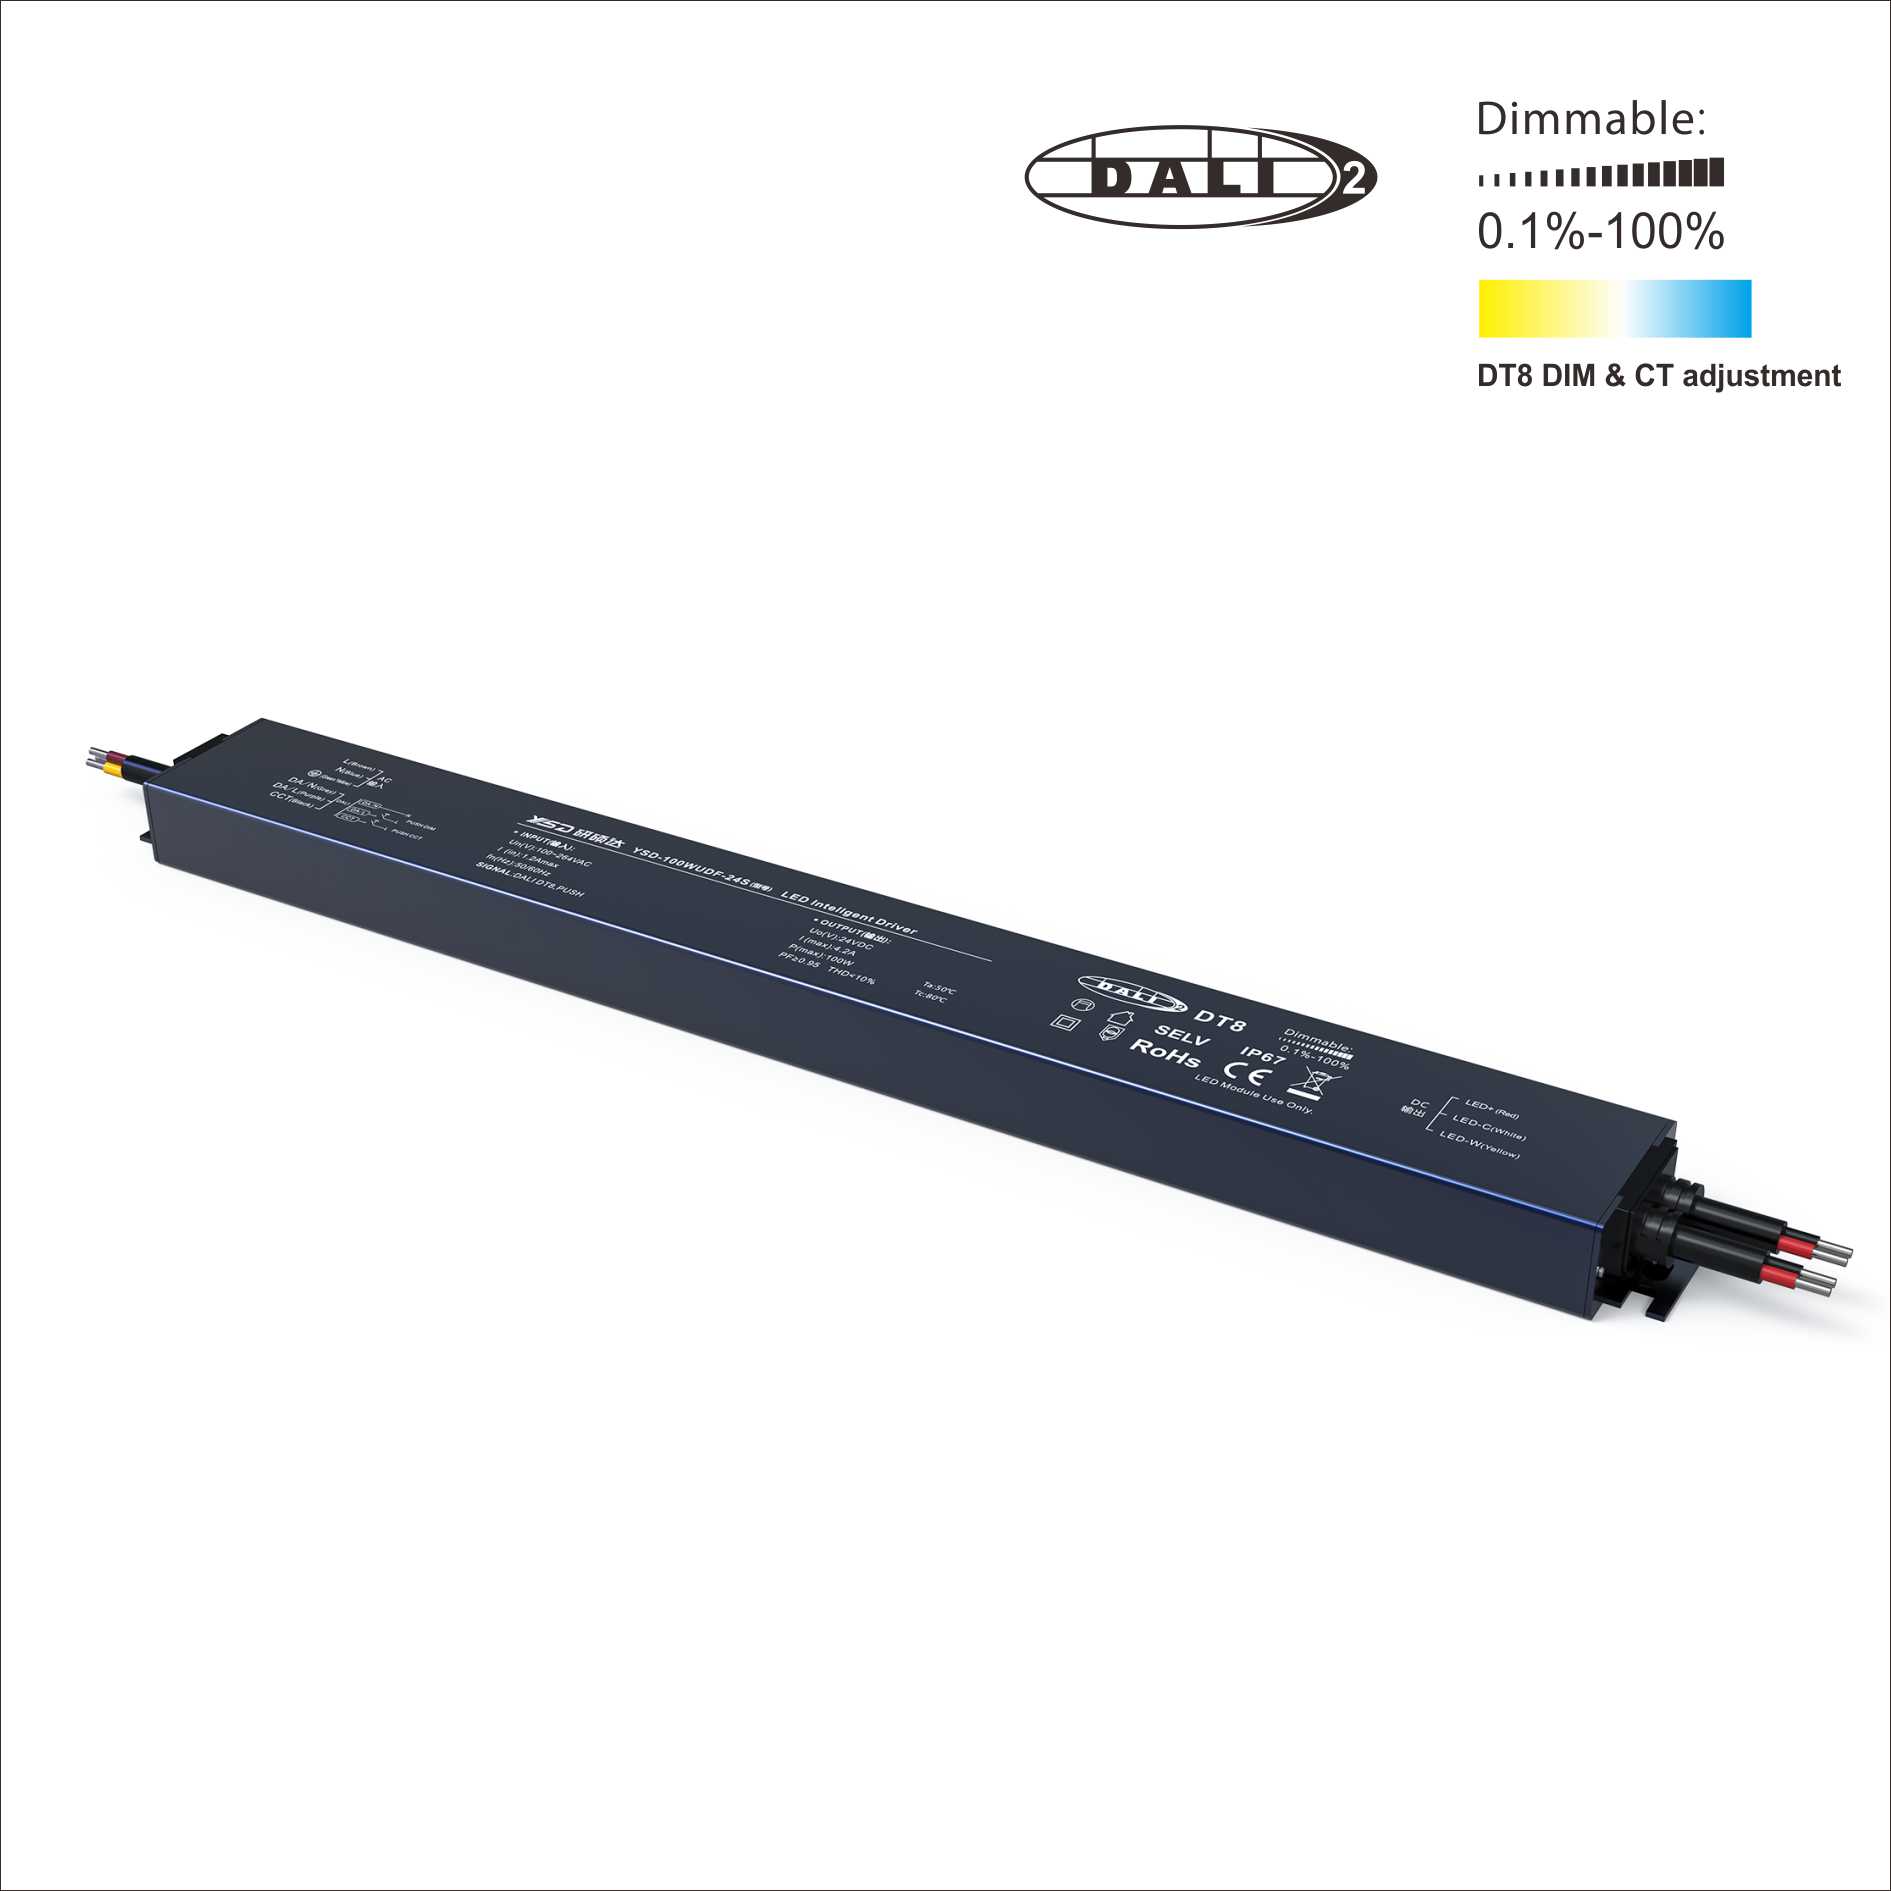 12/24V 100W DALI DT8 PUSH  Dimmable Waterproof LED Power Supply